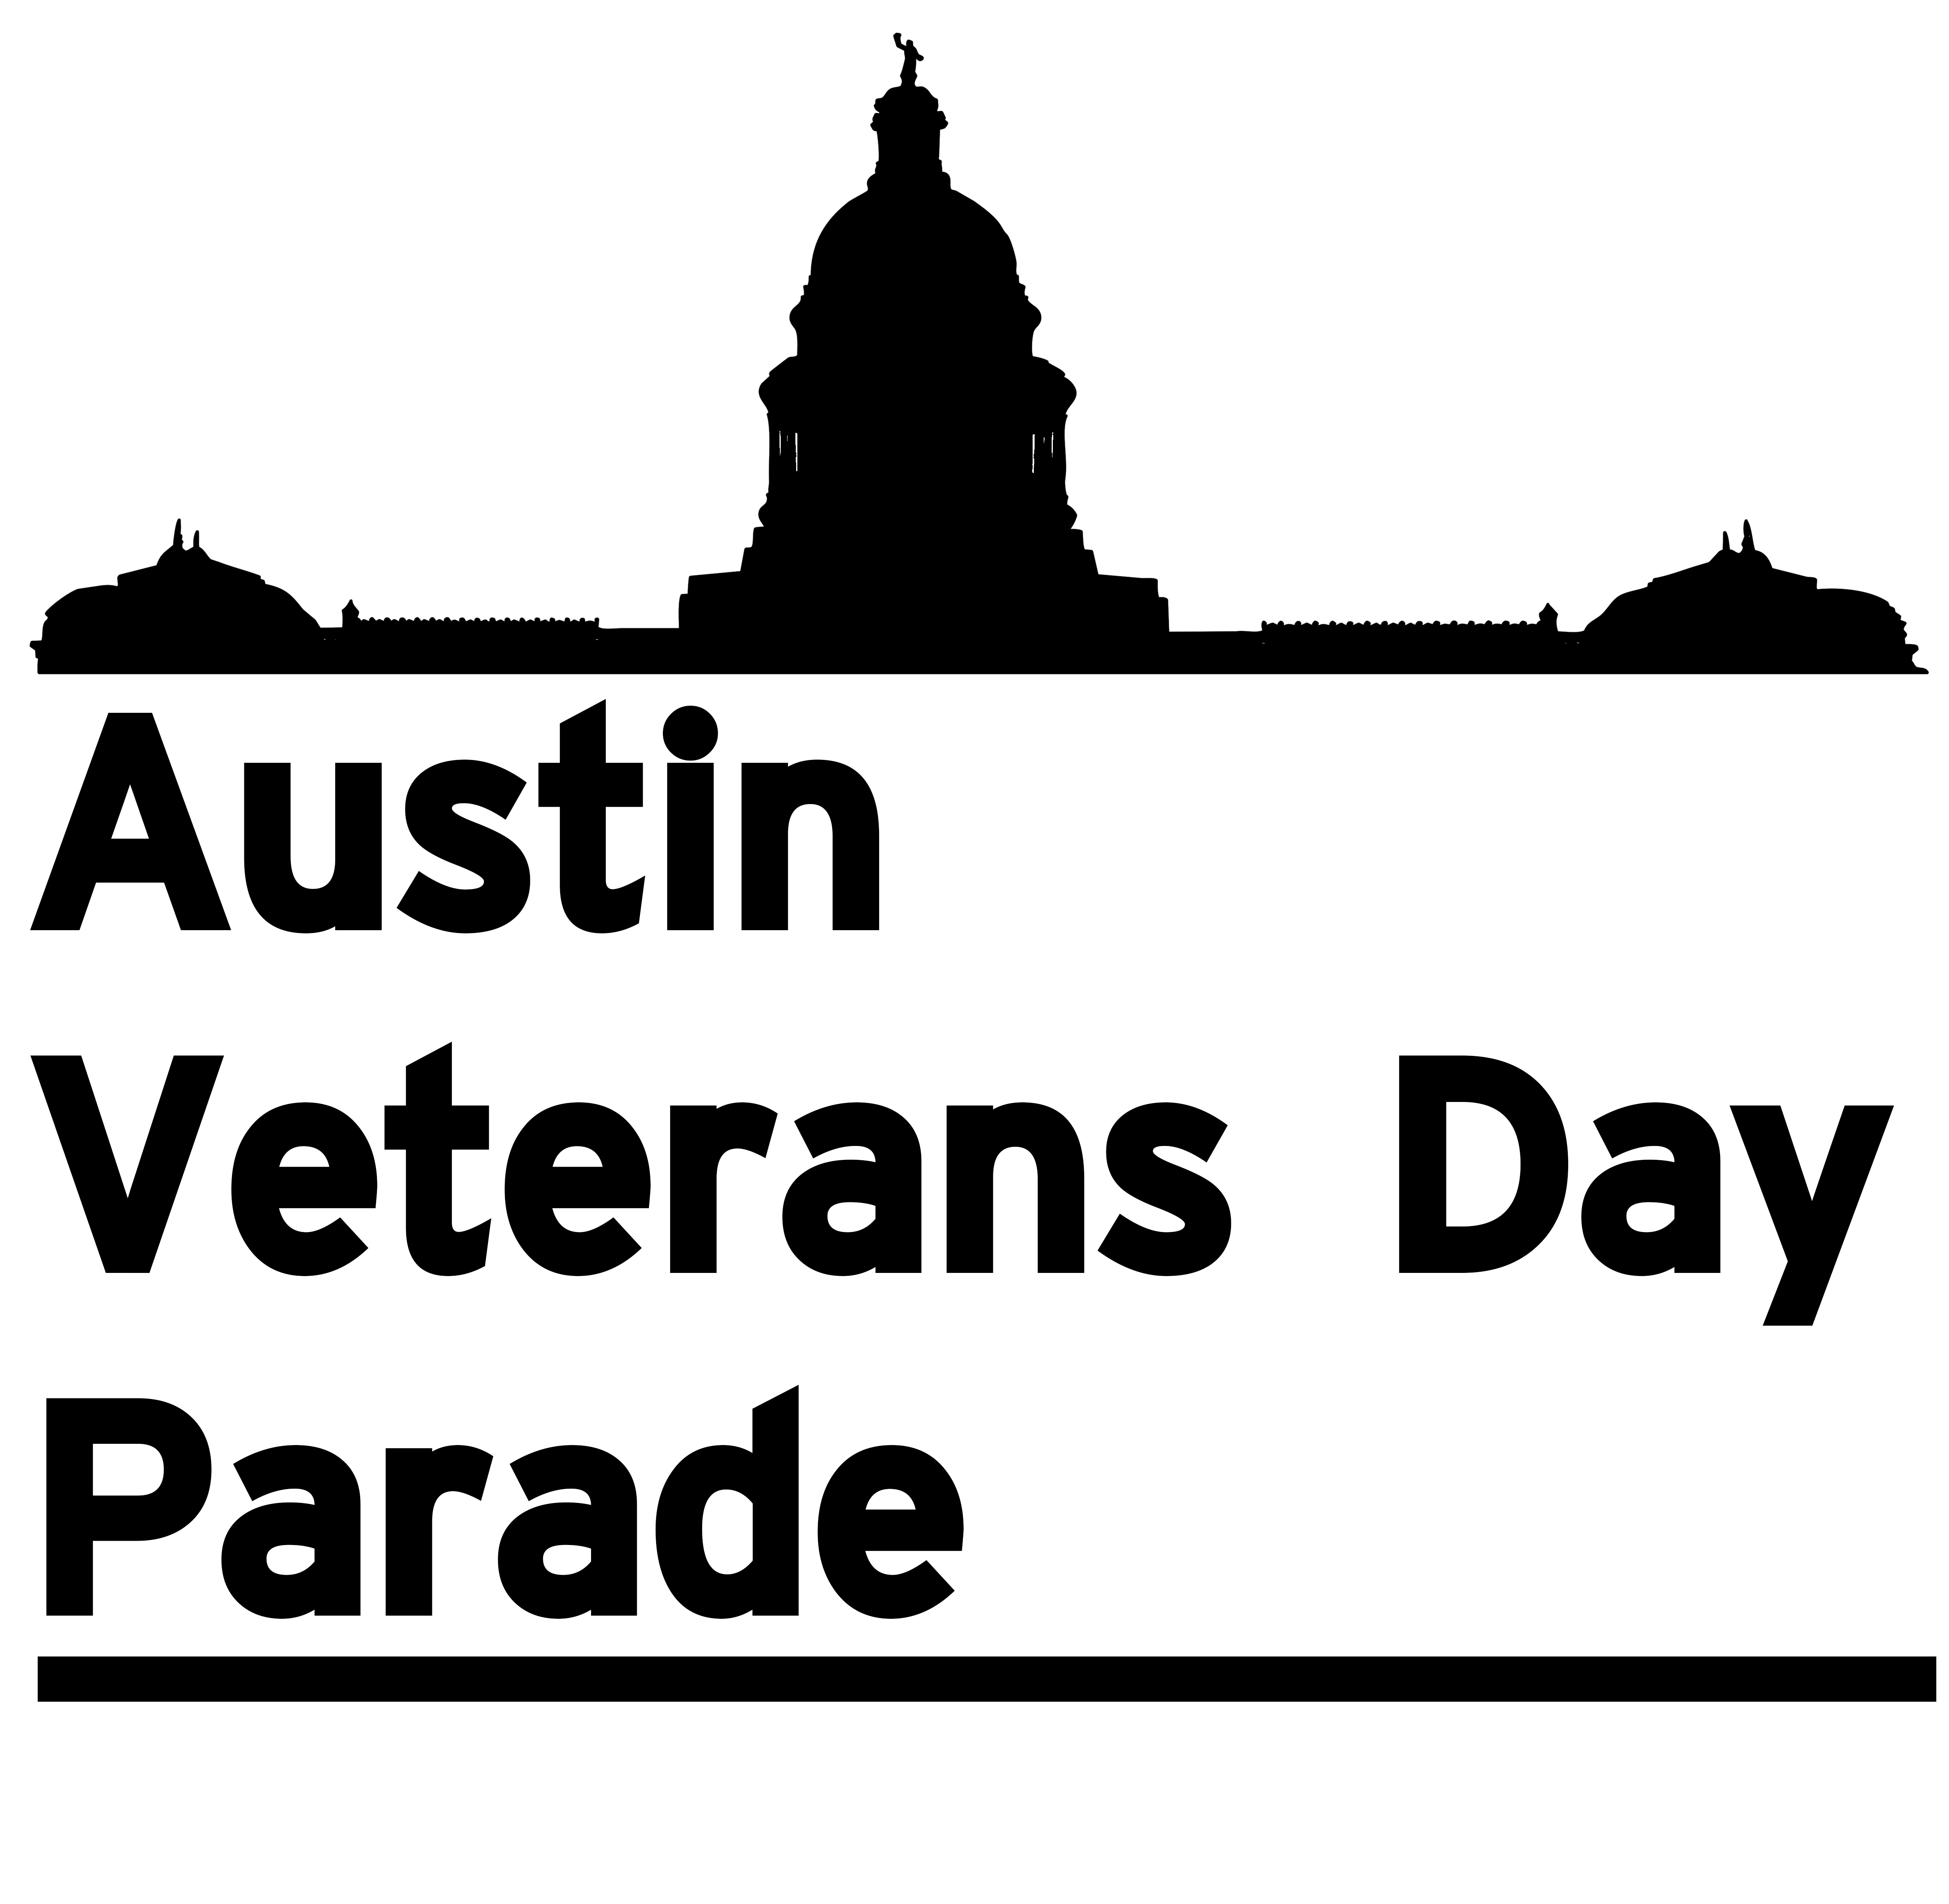 Hello Austin – welcome to the Austin Veterans Day Parade website